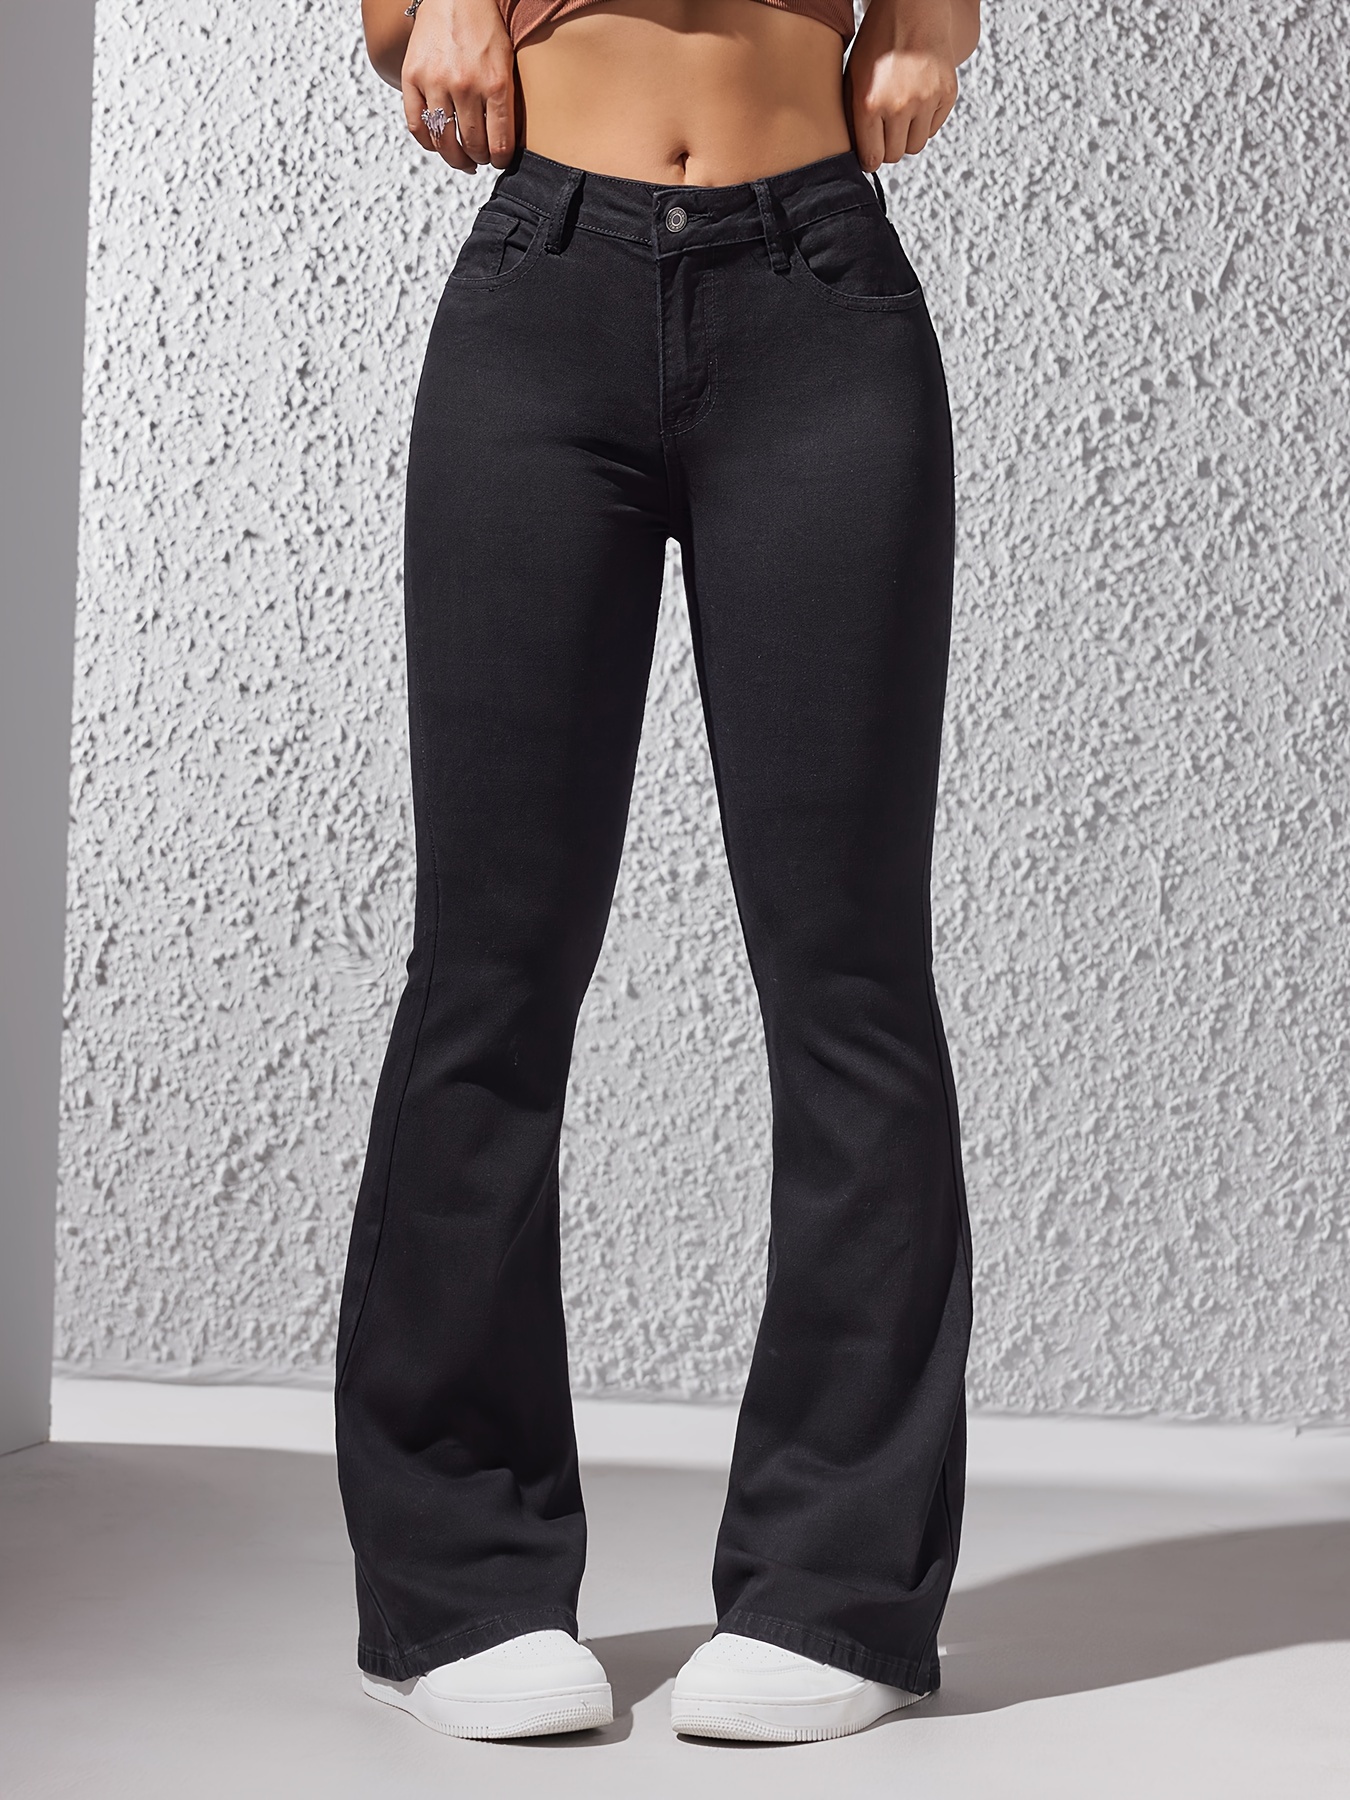 Black High Stretch Flare Jeans, High Rise Slim Fit Casual Bell Bottom  Jeans, Women's Denim Jeans & Clothing